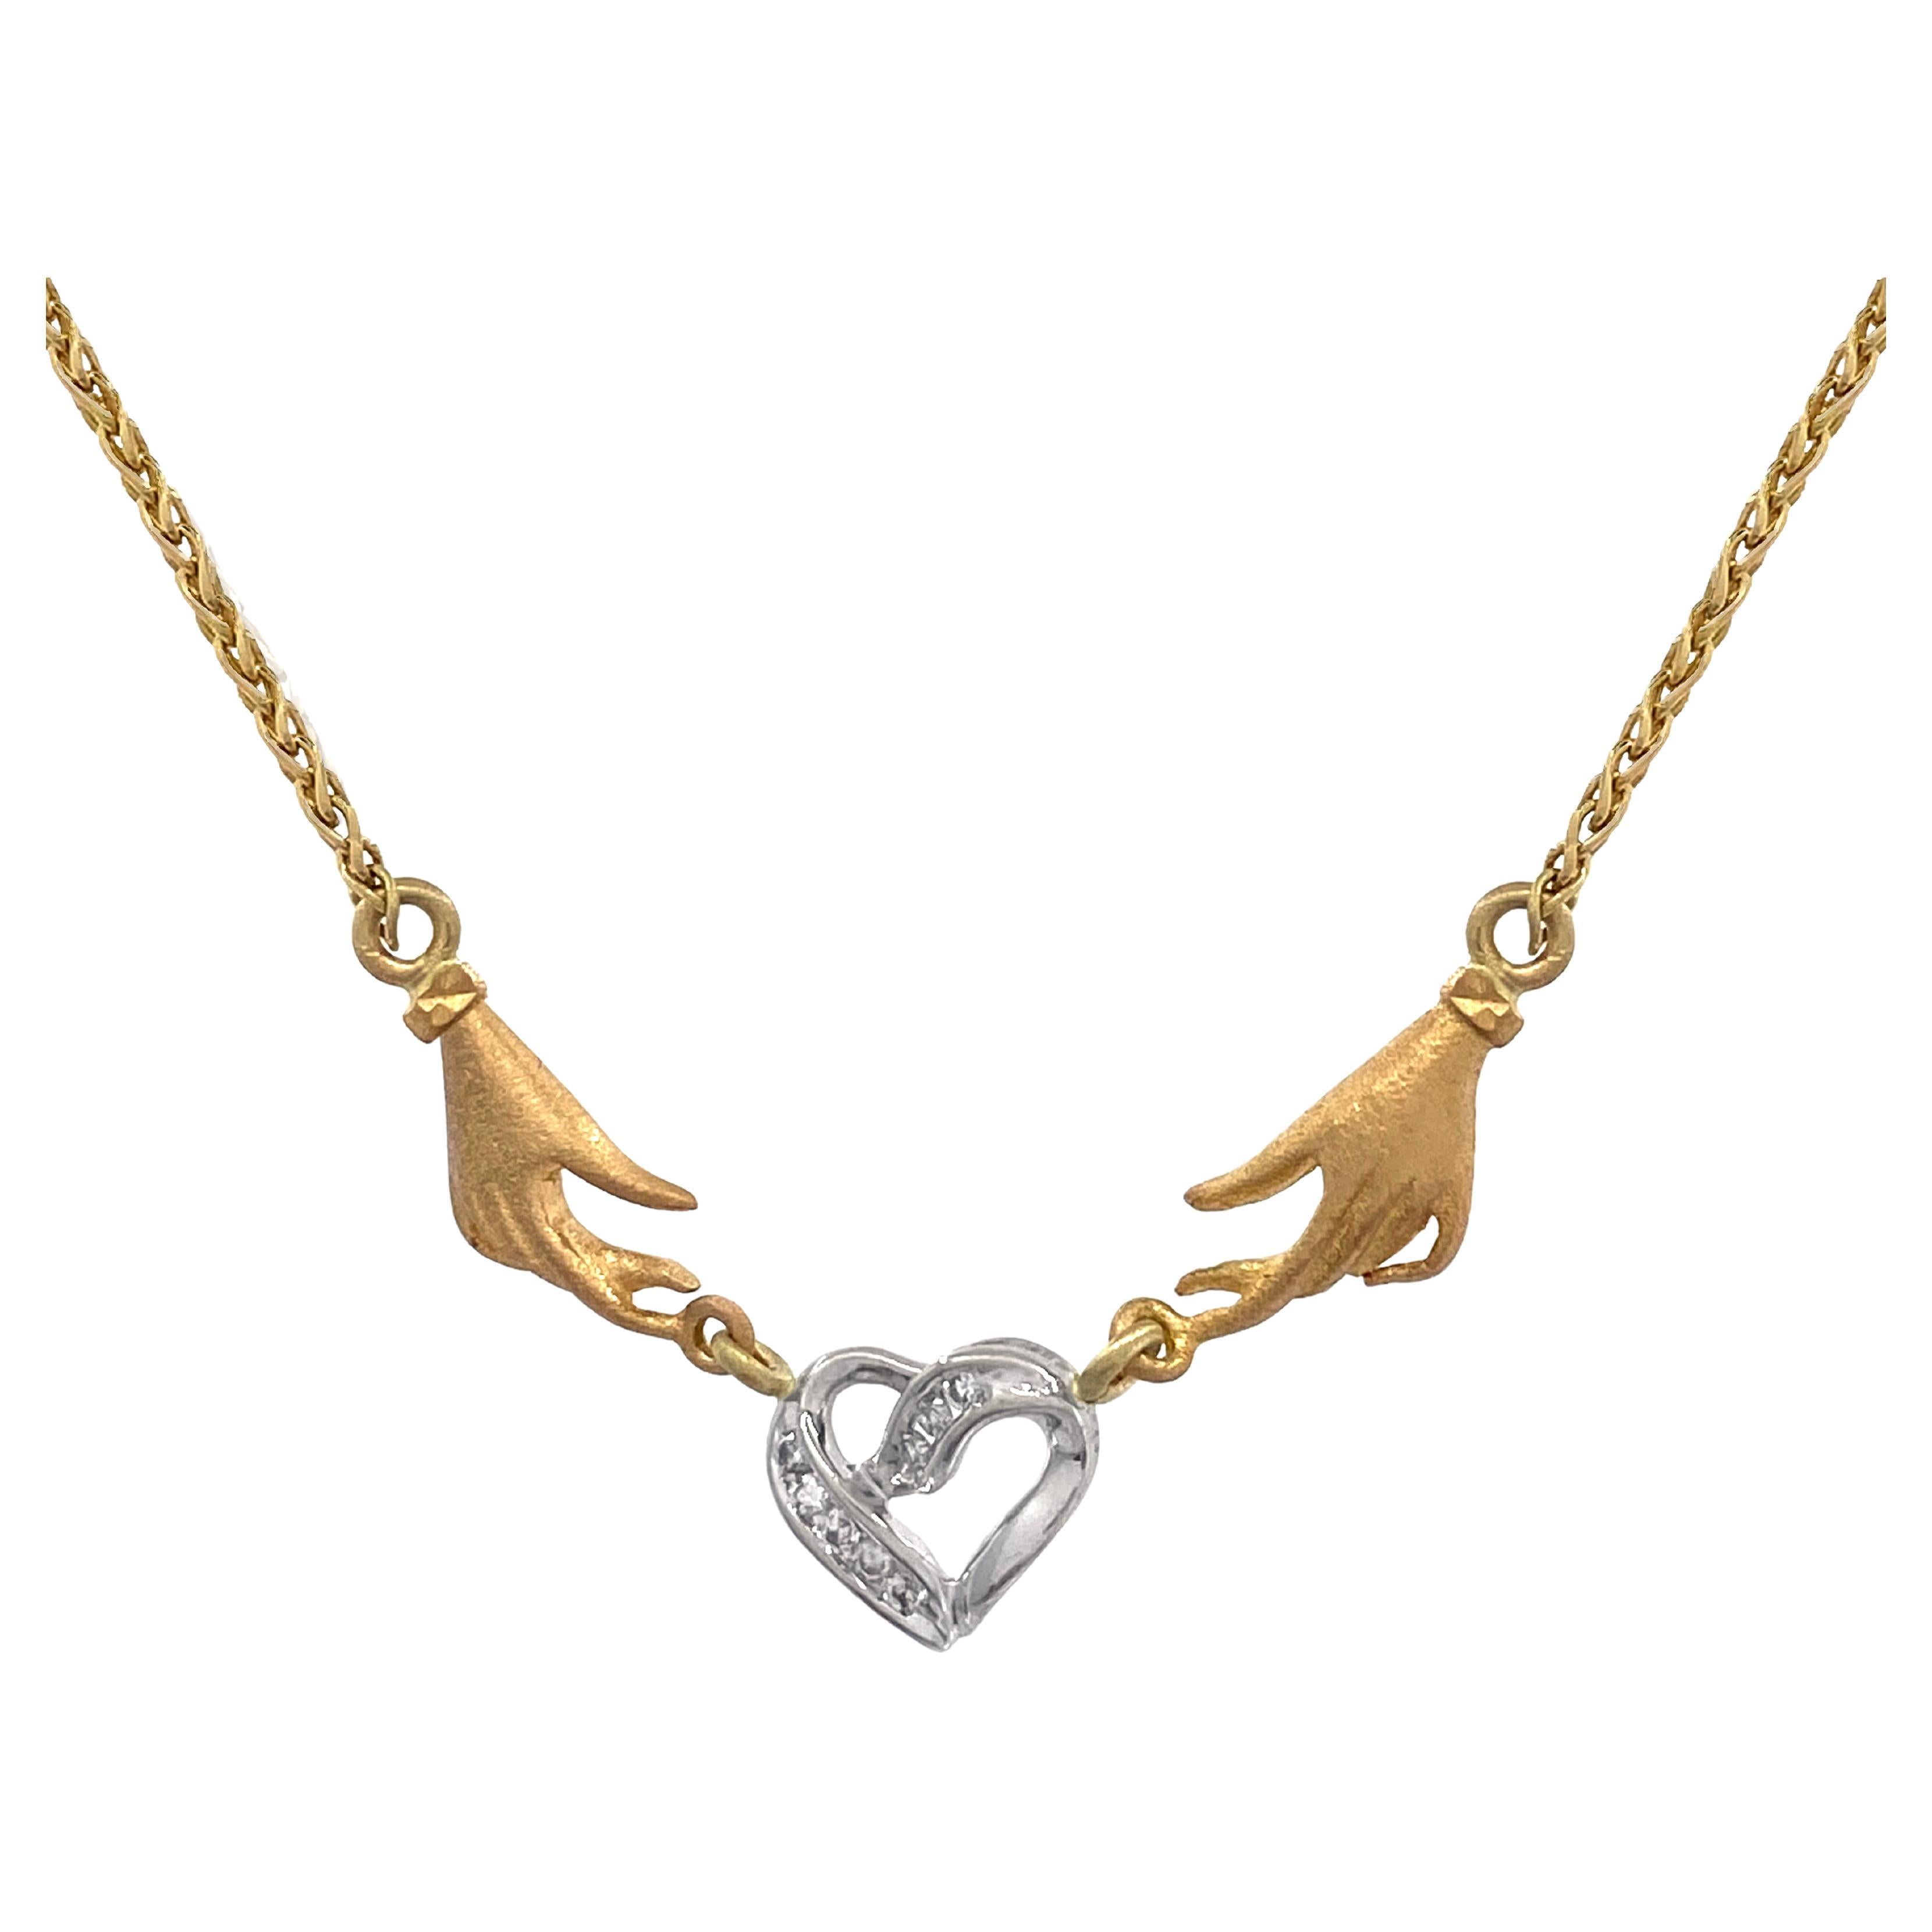 "Handy Heart" Necklace in Mixed Yellow & White Gold with White Diamonds For Sale